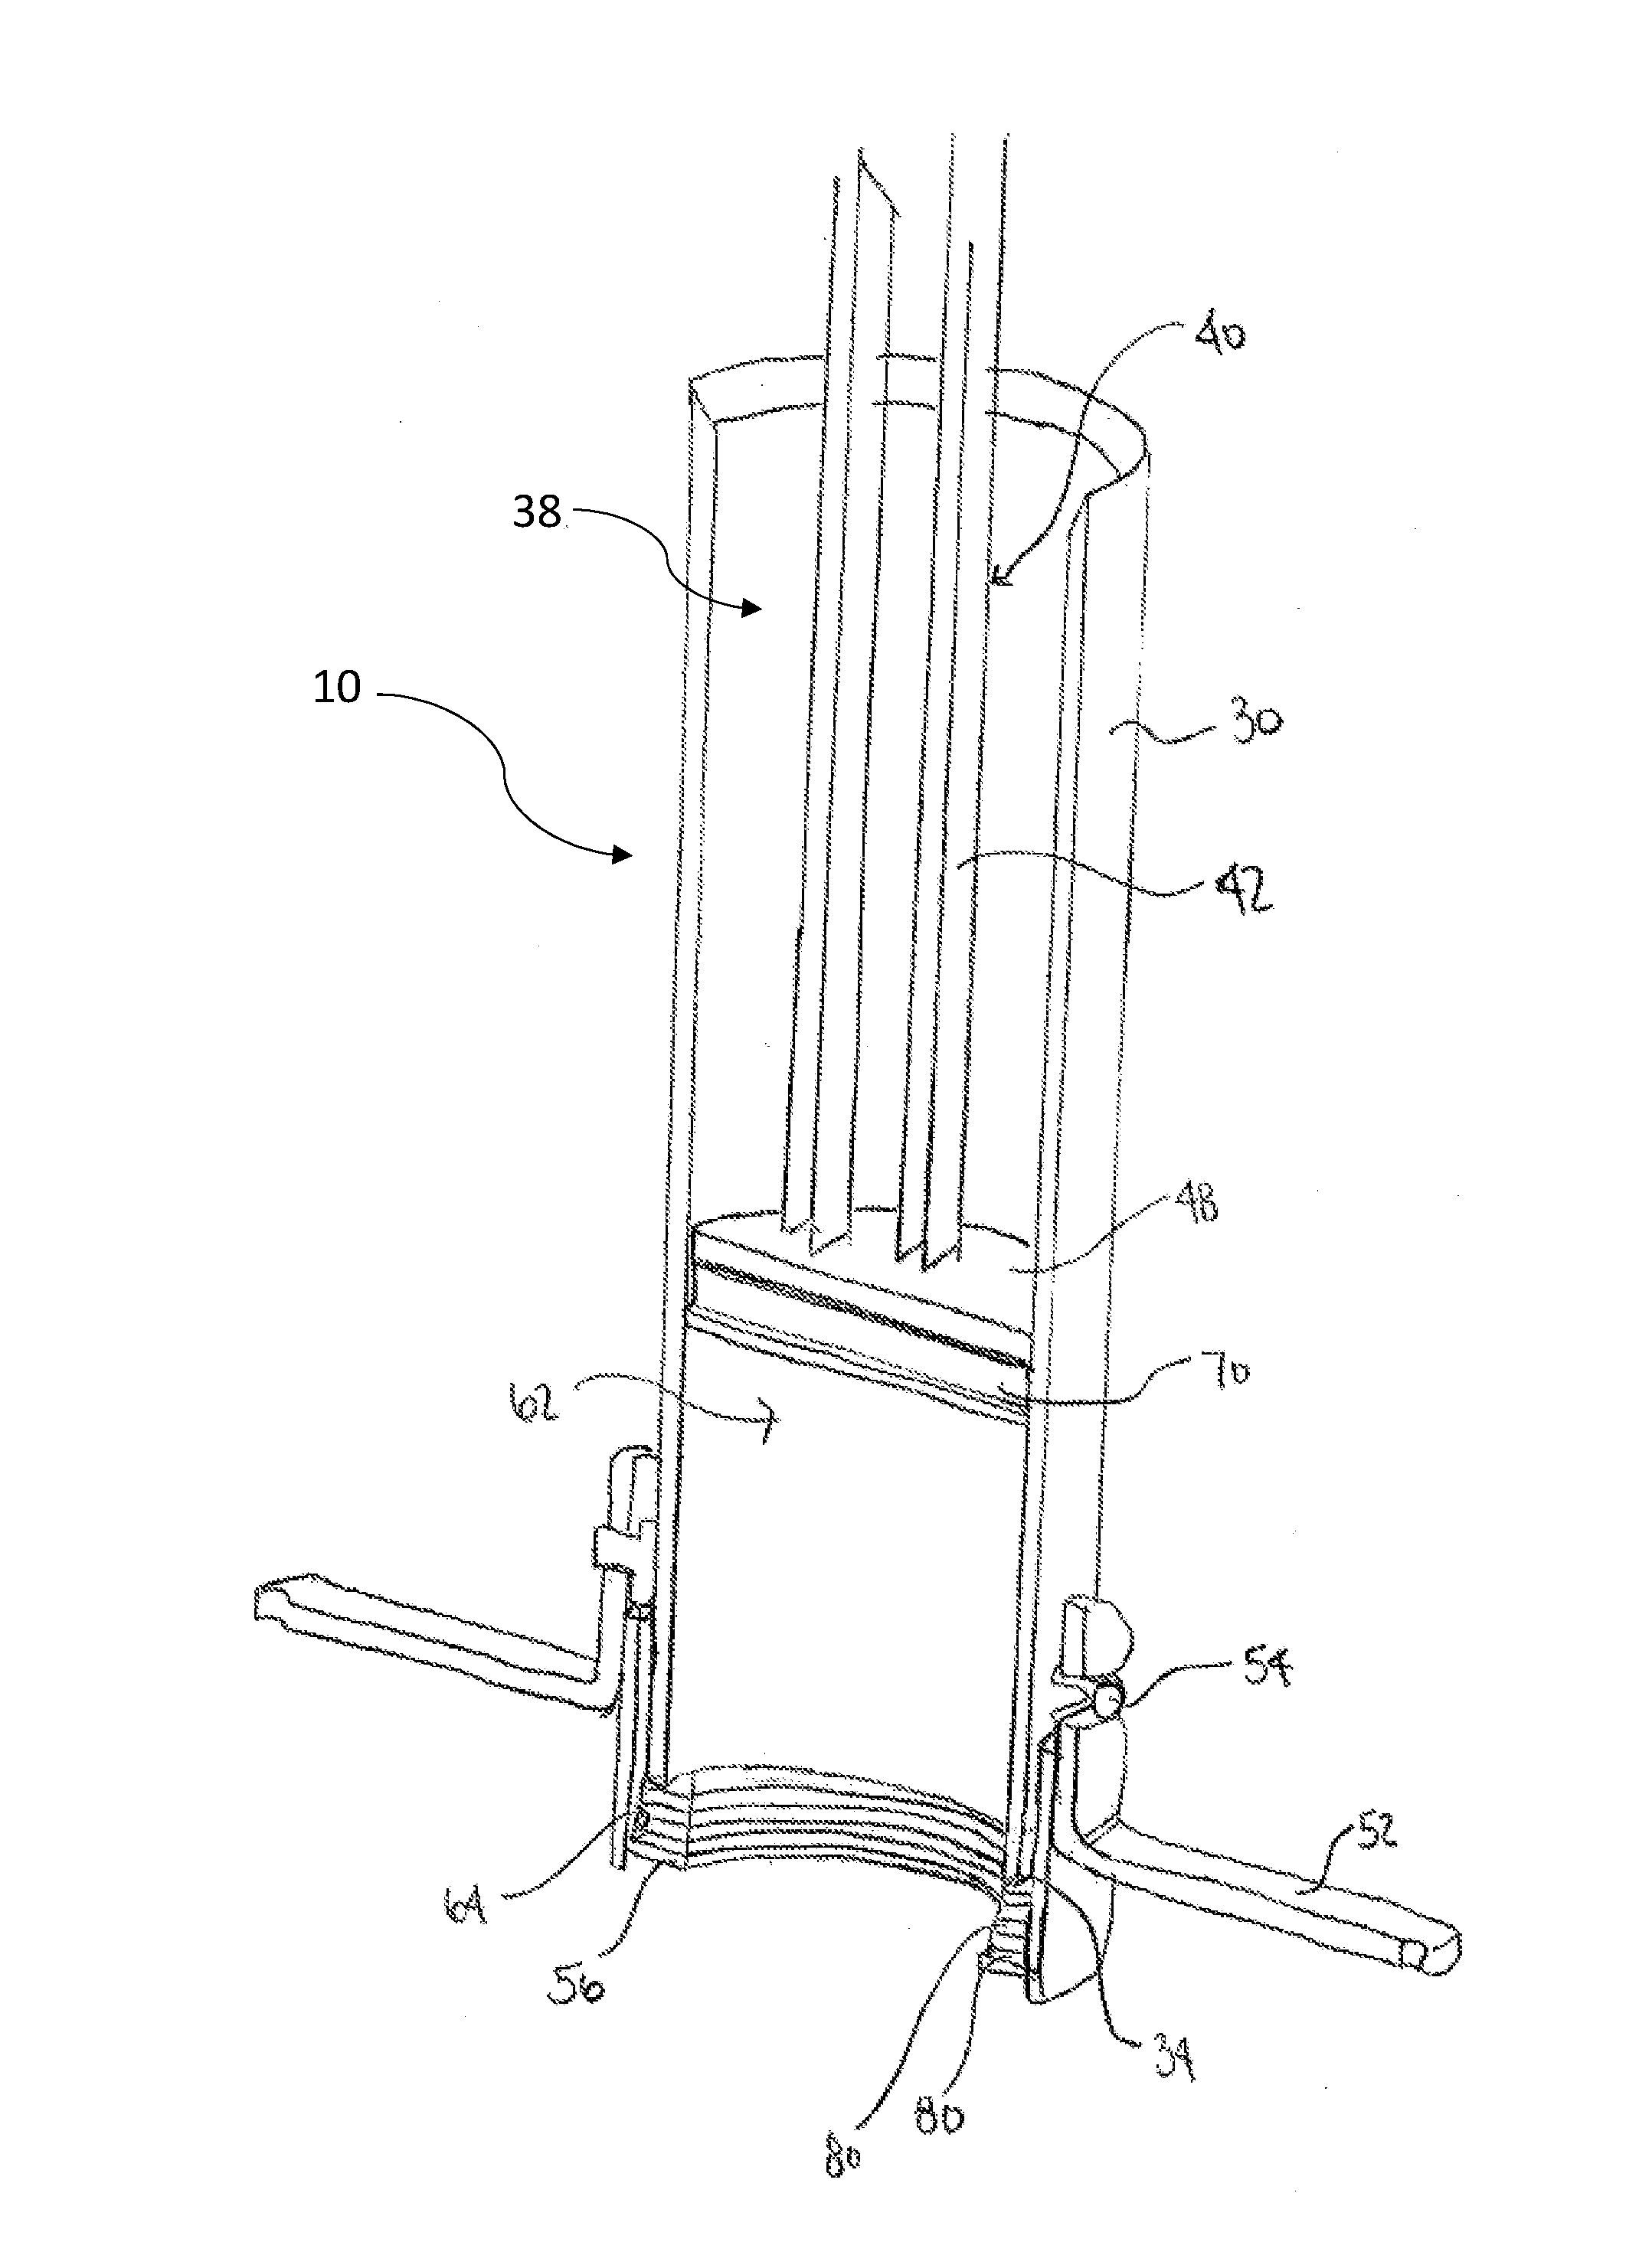 Extrusion seal devices and methods